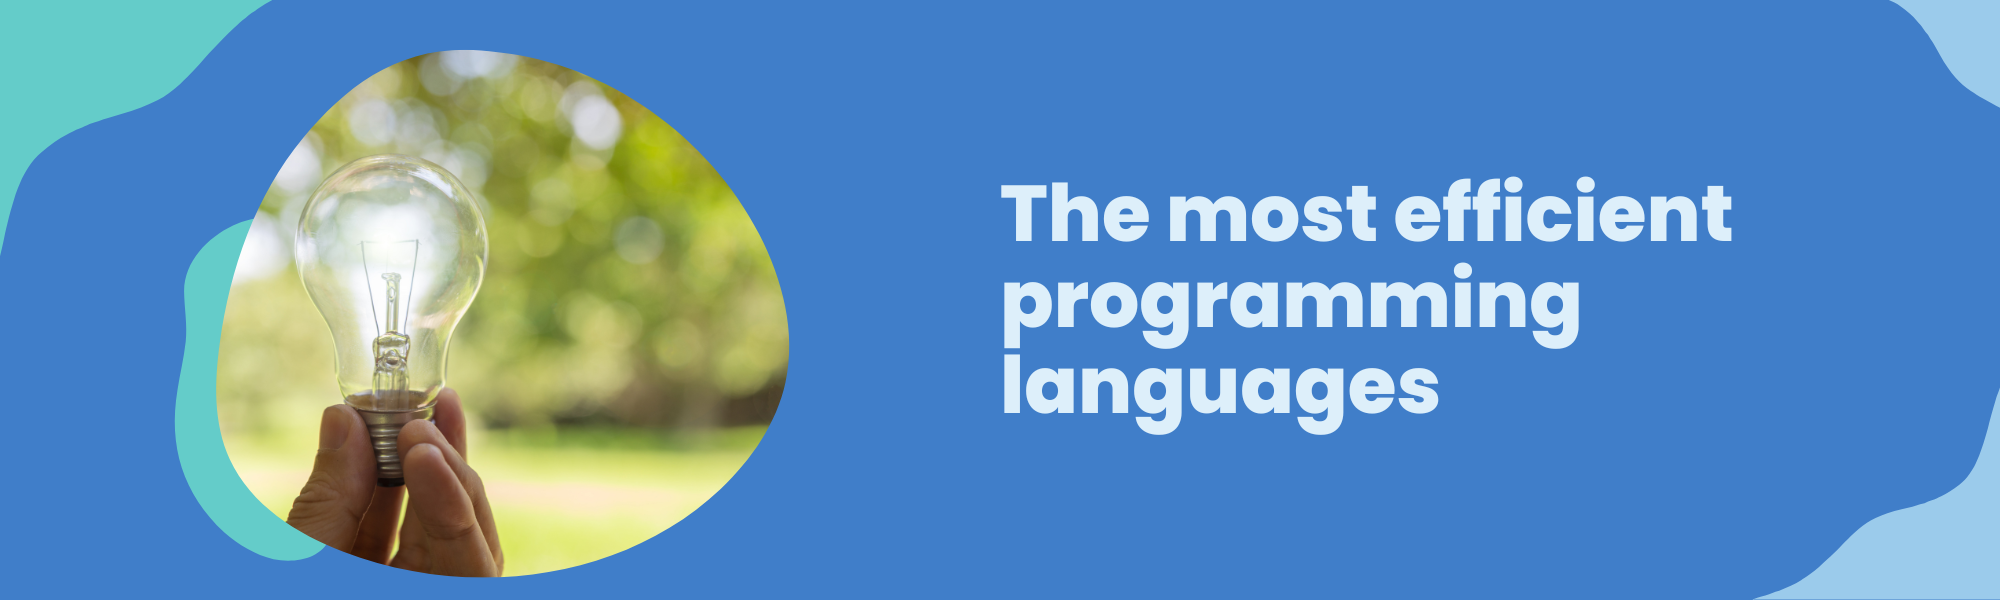 The Most Efficient and Environment Friendly Programming Languages - Stratoflow